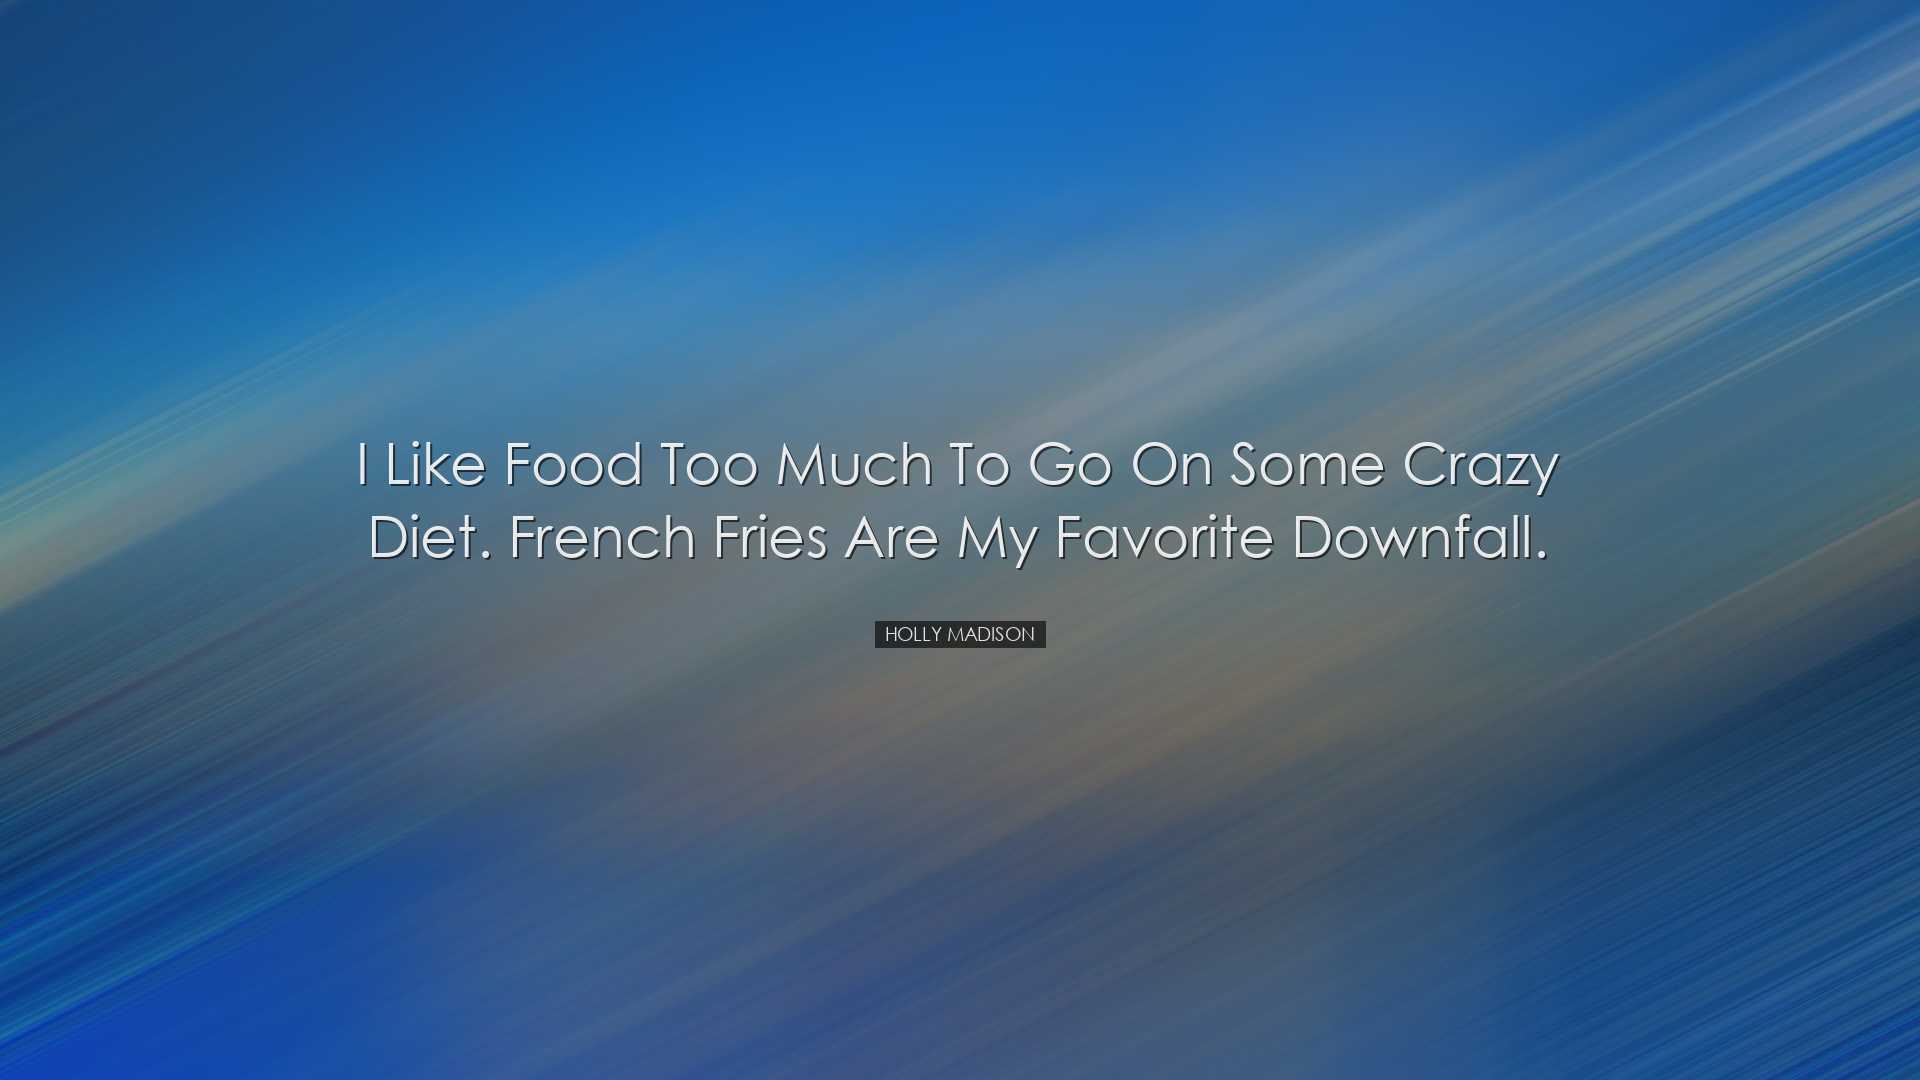 I like food too much to go on some crazy diet. French fries are my